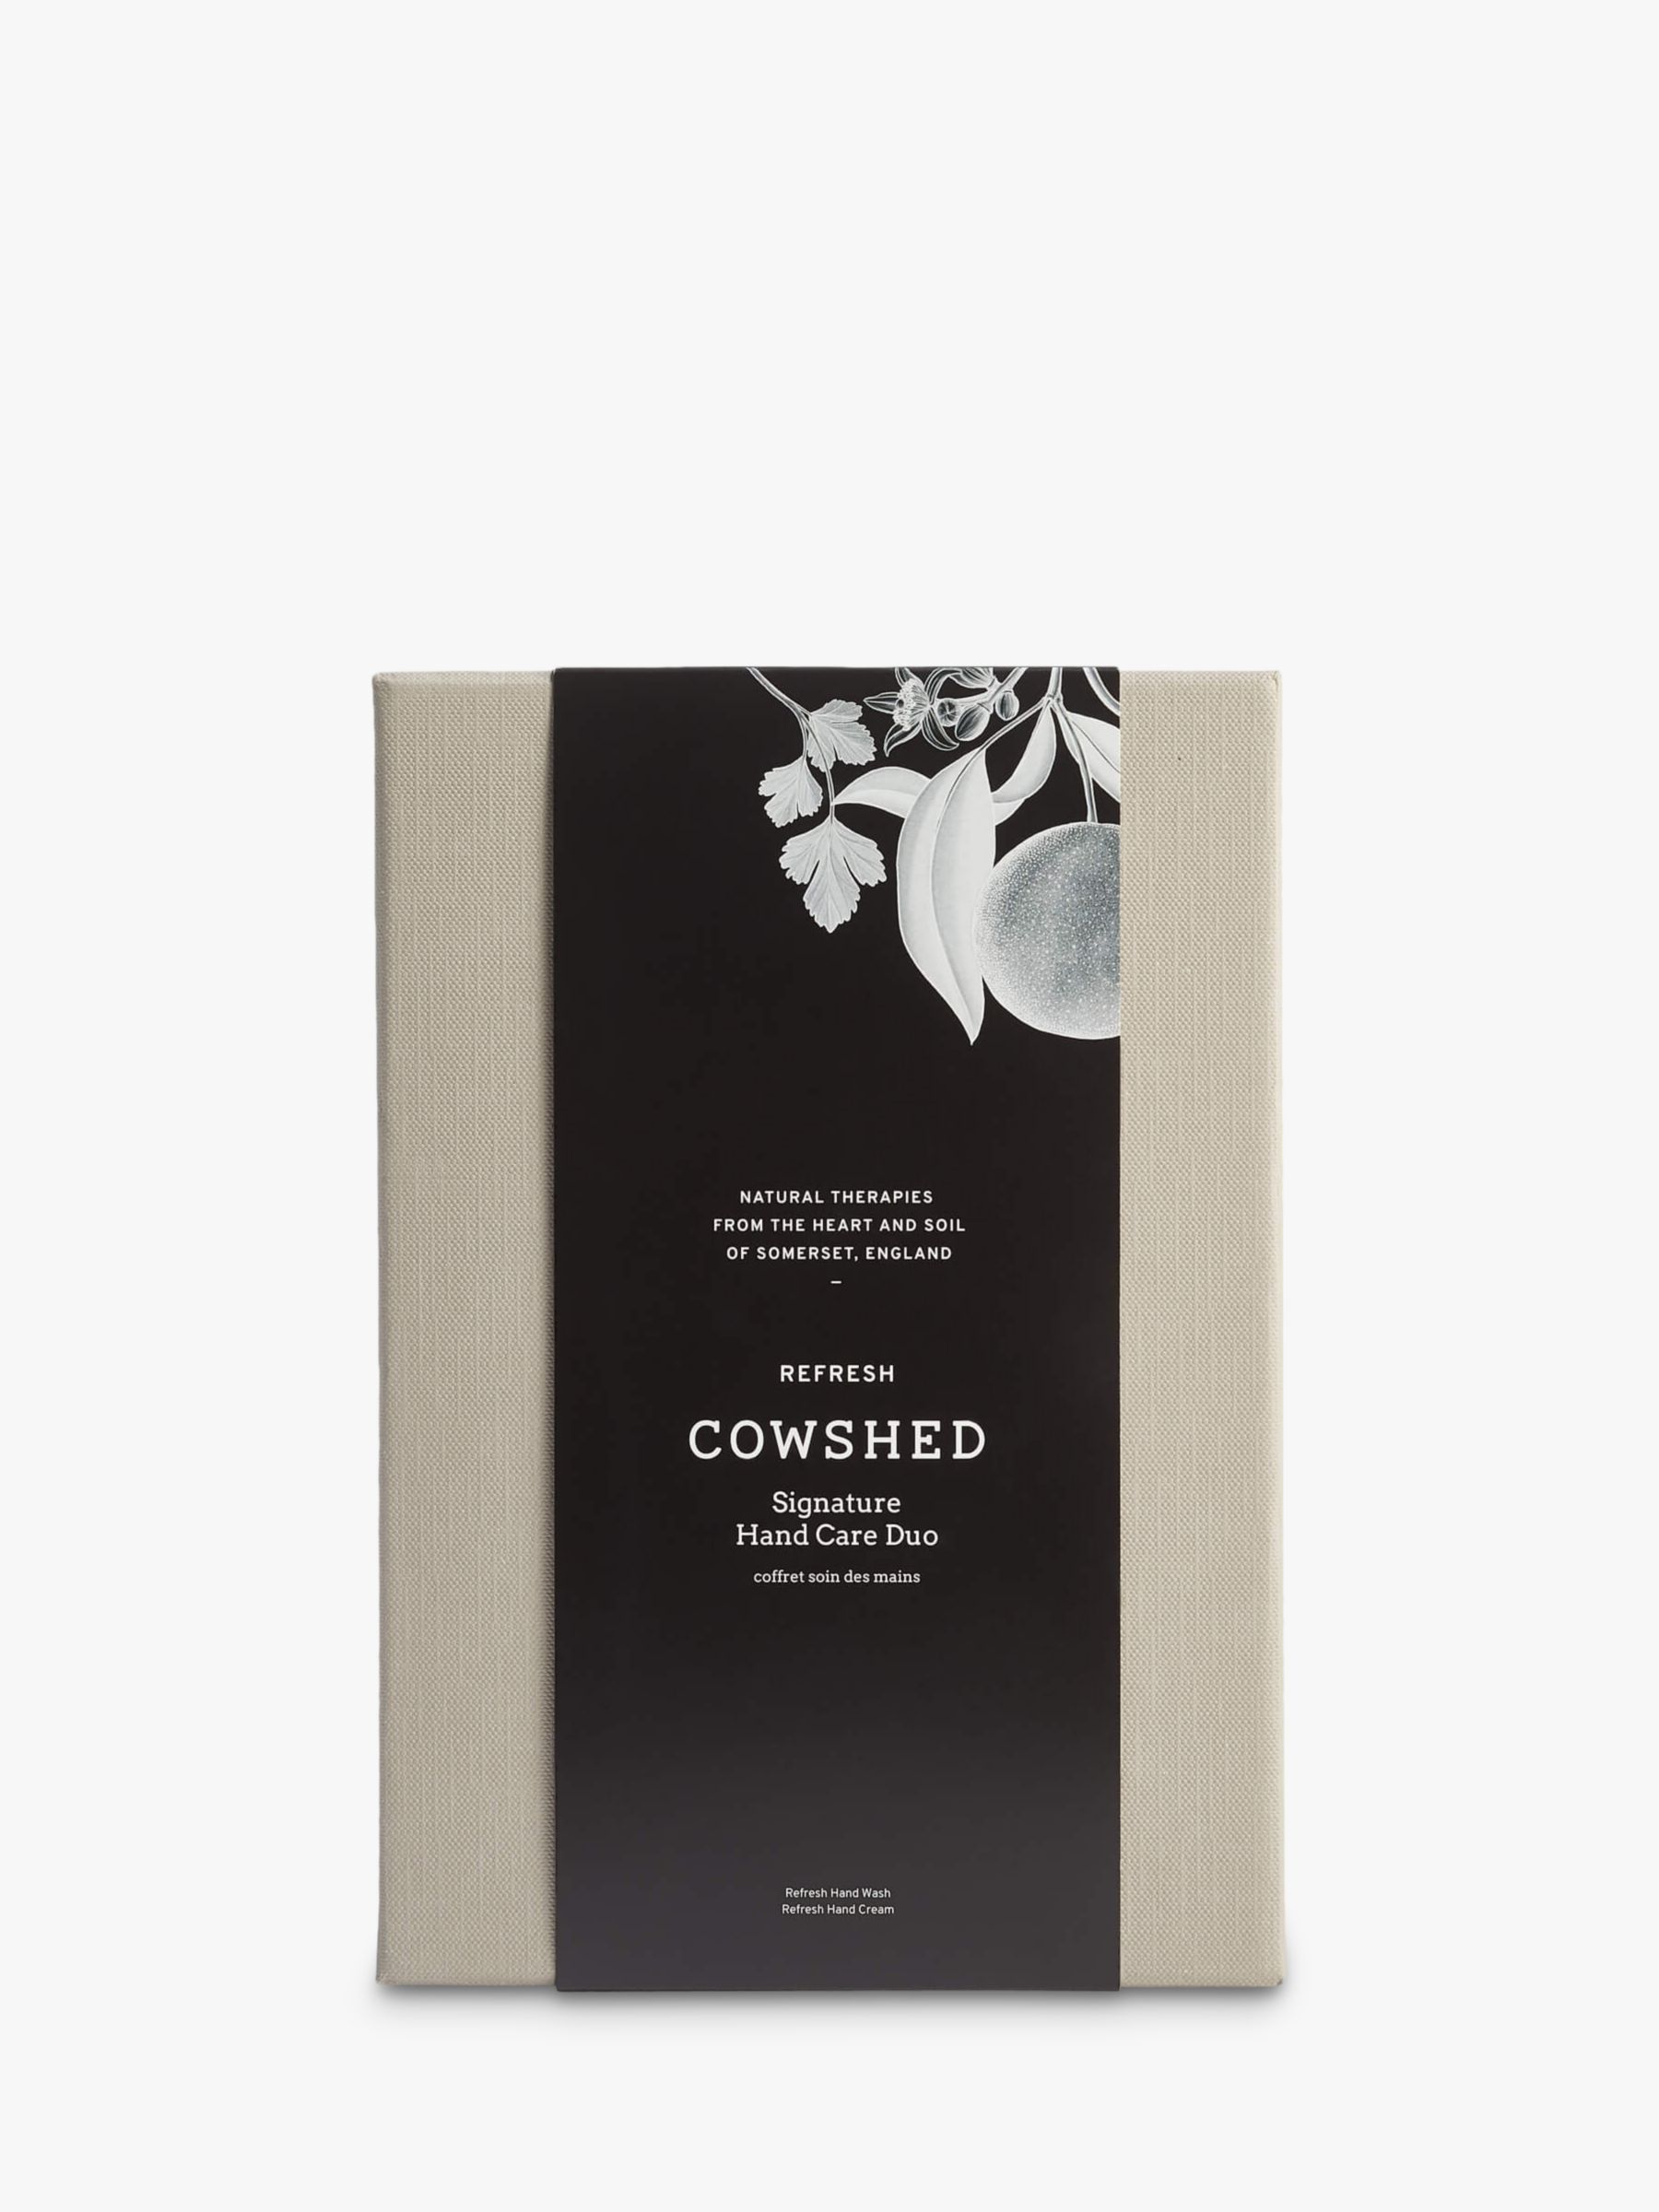 Cowshed Signature Hand Care Duo Bodycare Gift Set 3